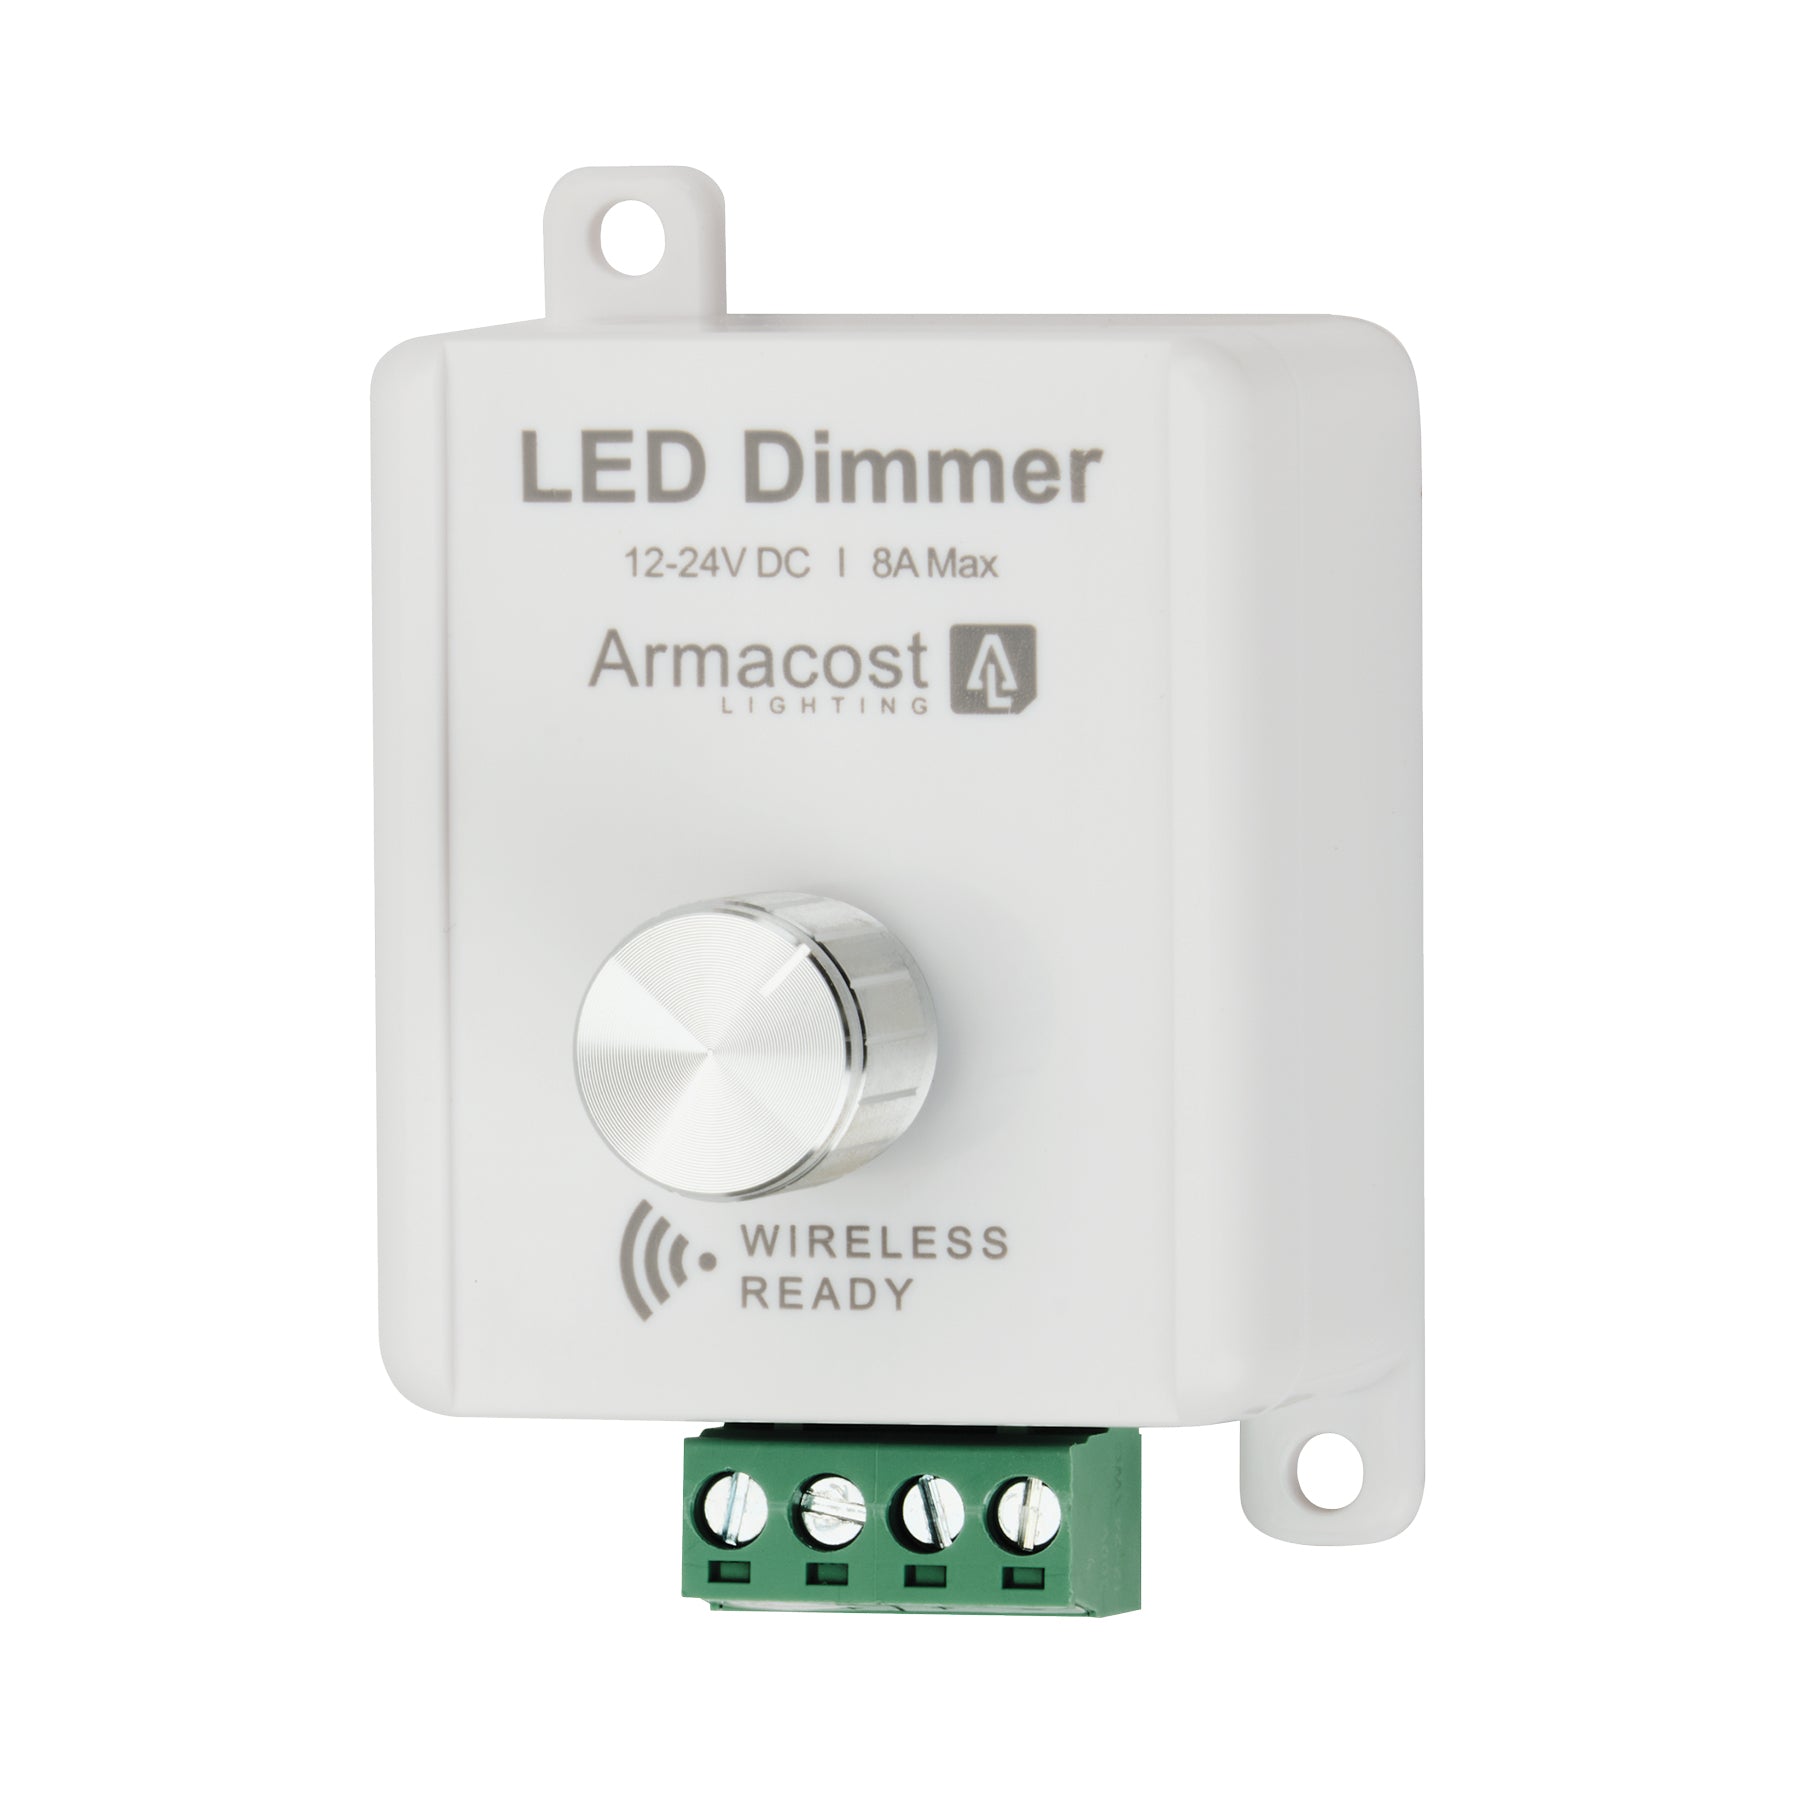 Cabinet Door LED Light Switch – Armacost Lighting